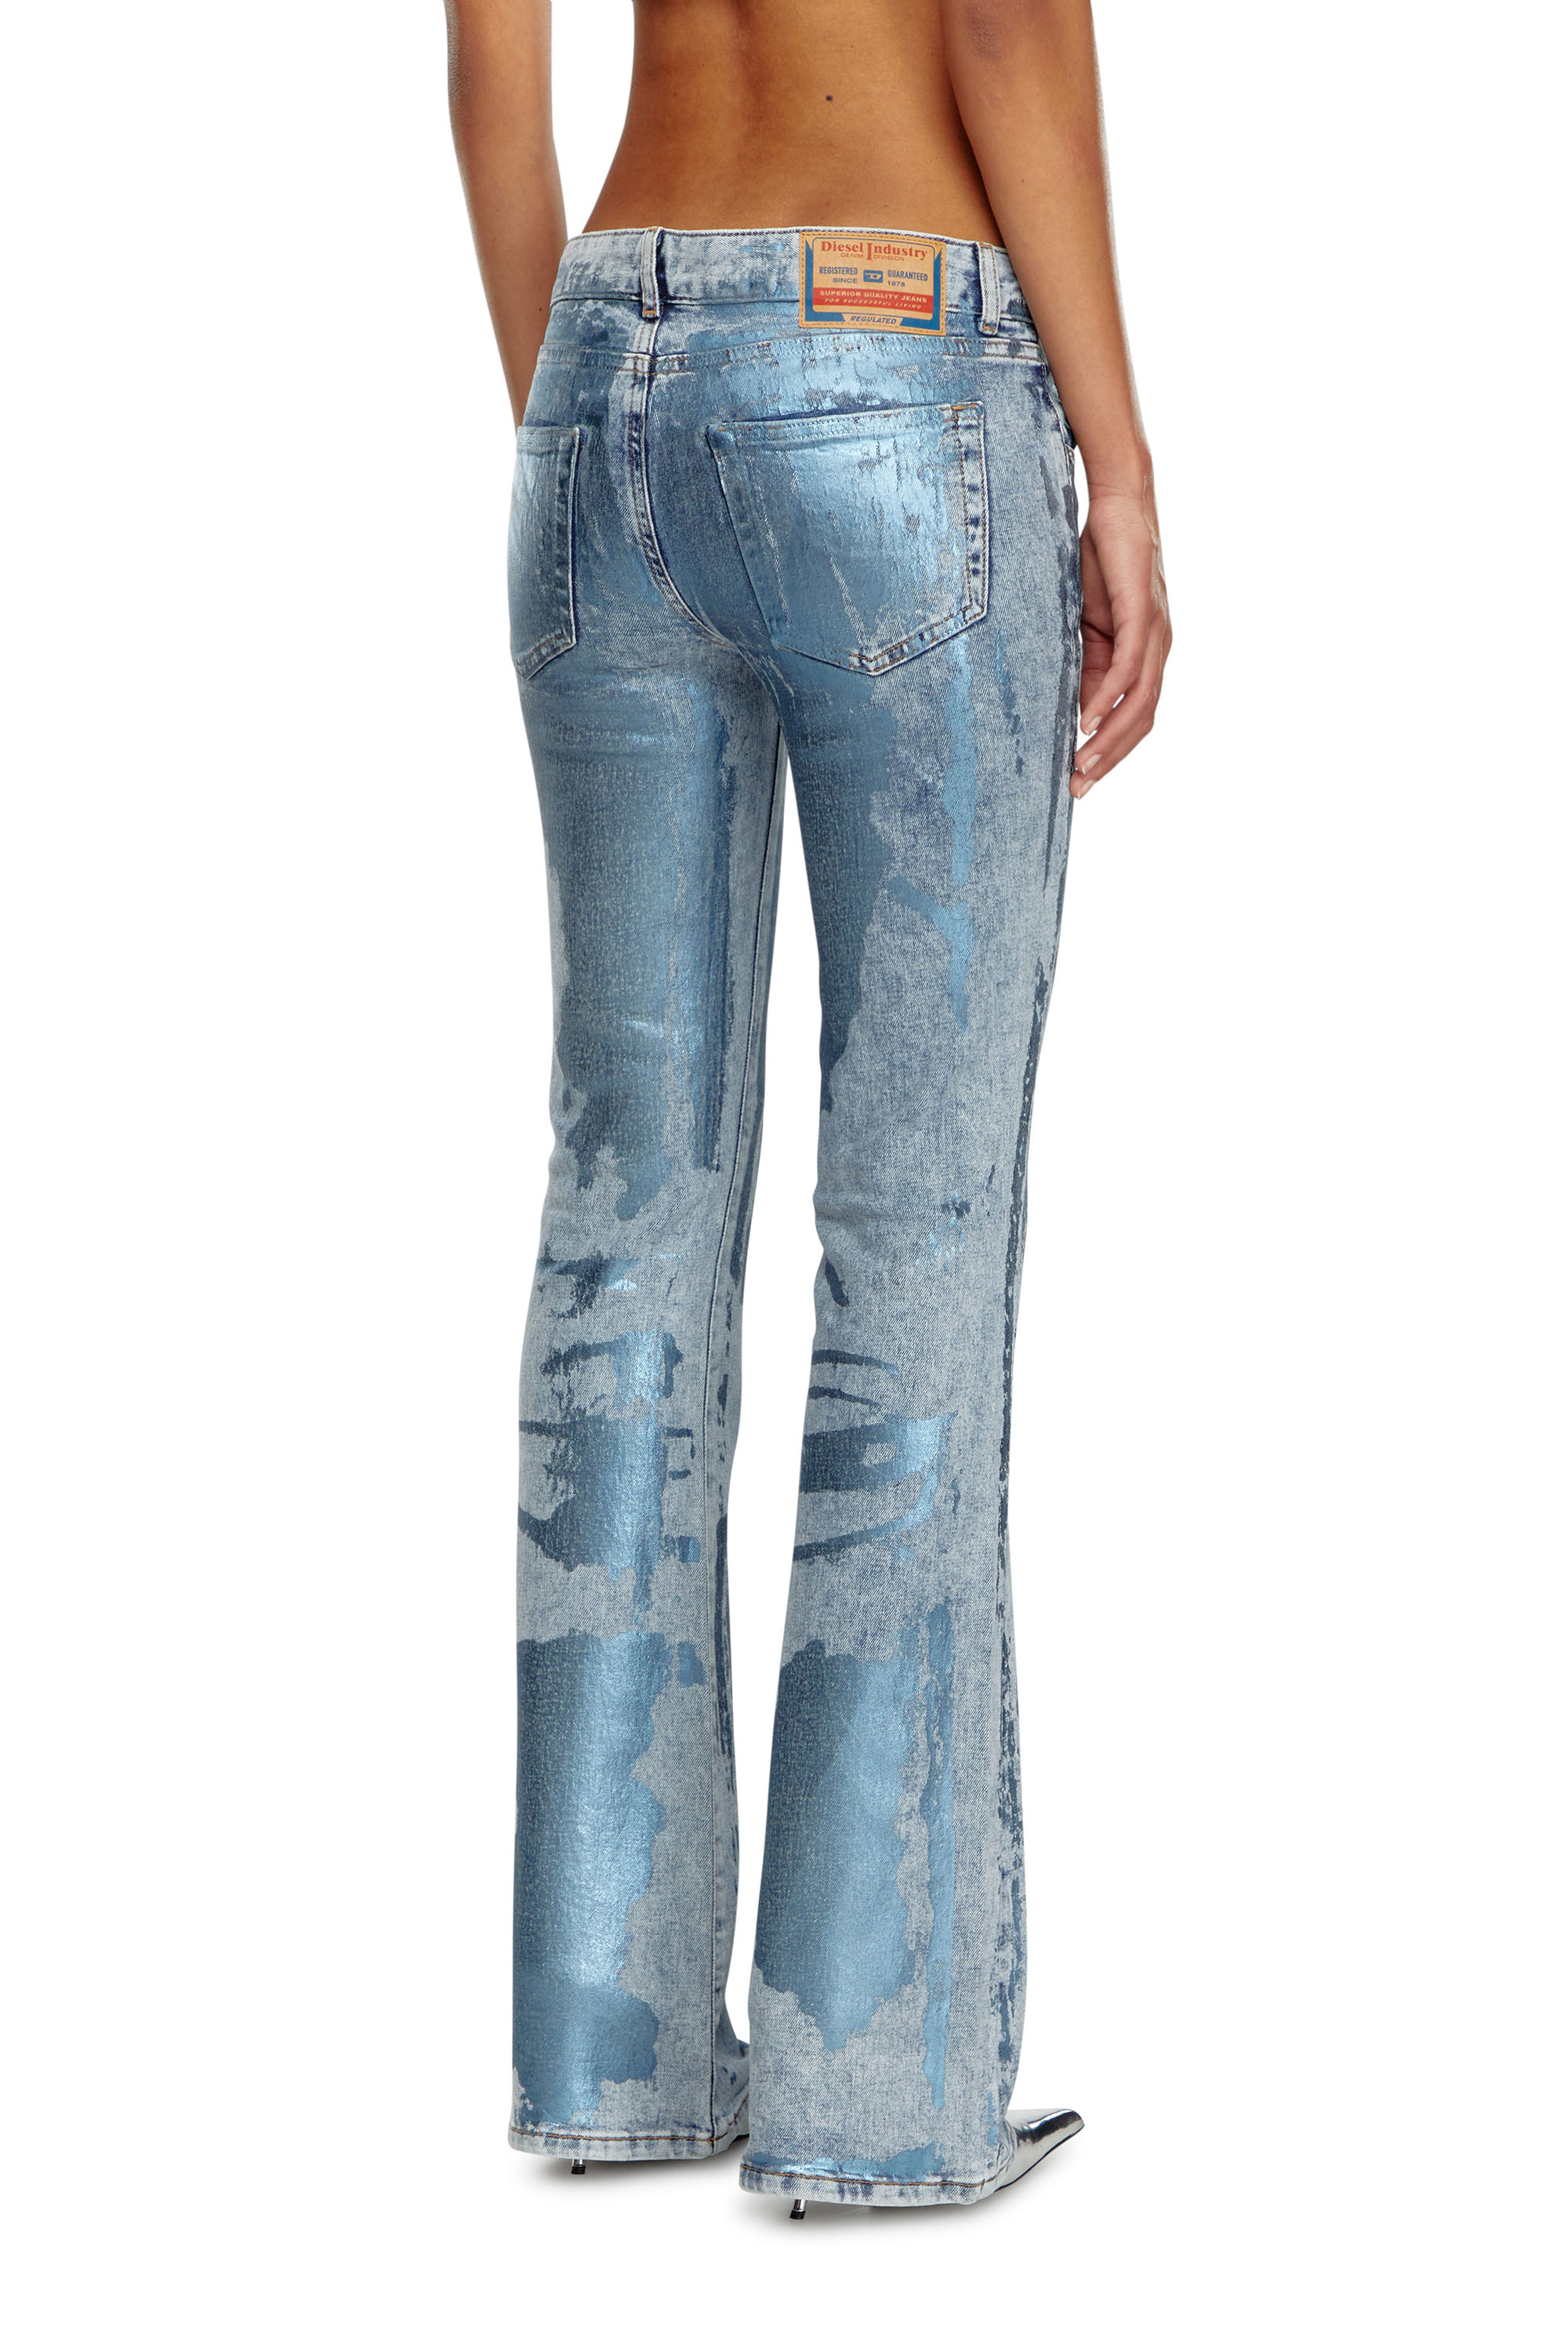 Diesel - Bootcut and Flare Jeans 1969 D-Ebbey 0AJEU, Mujer Bootcut y Flare Jeans - 1969 D-Ebbey in Azul marino - Image 3